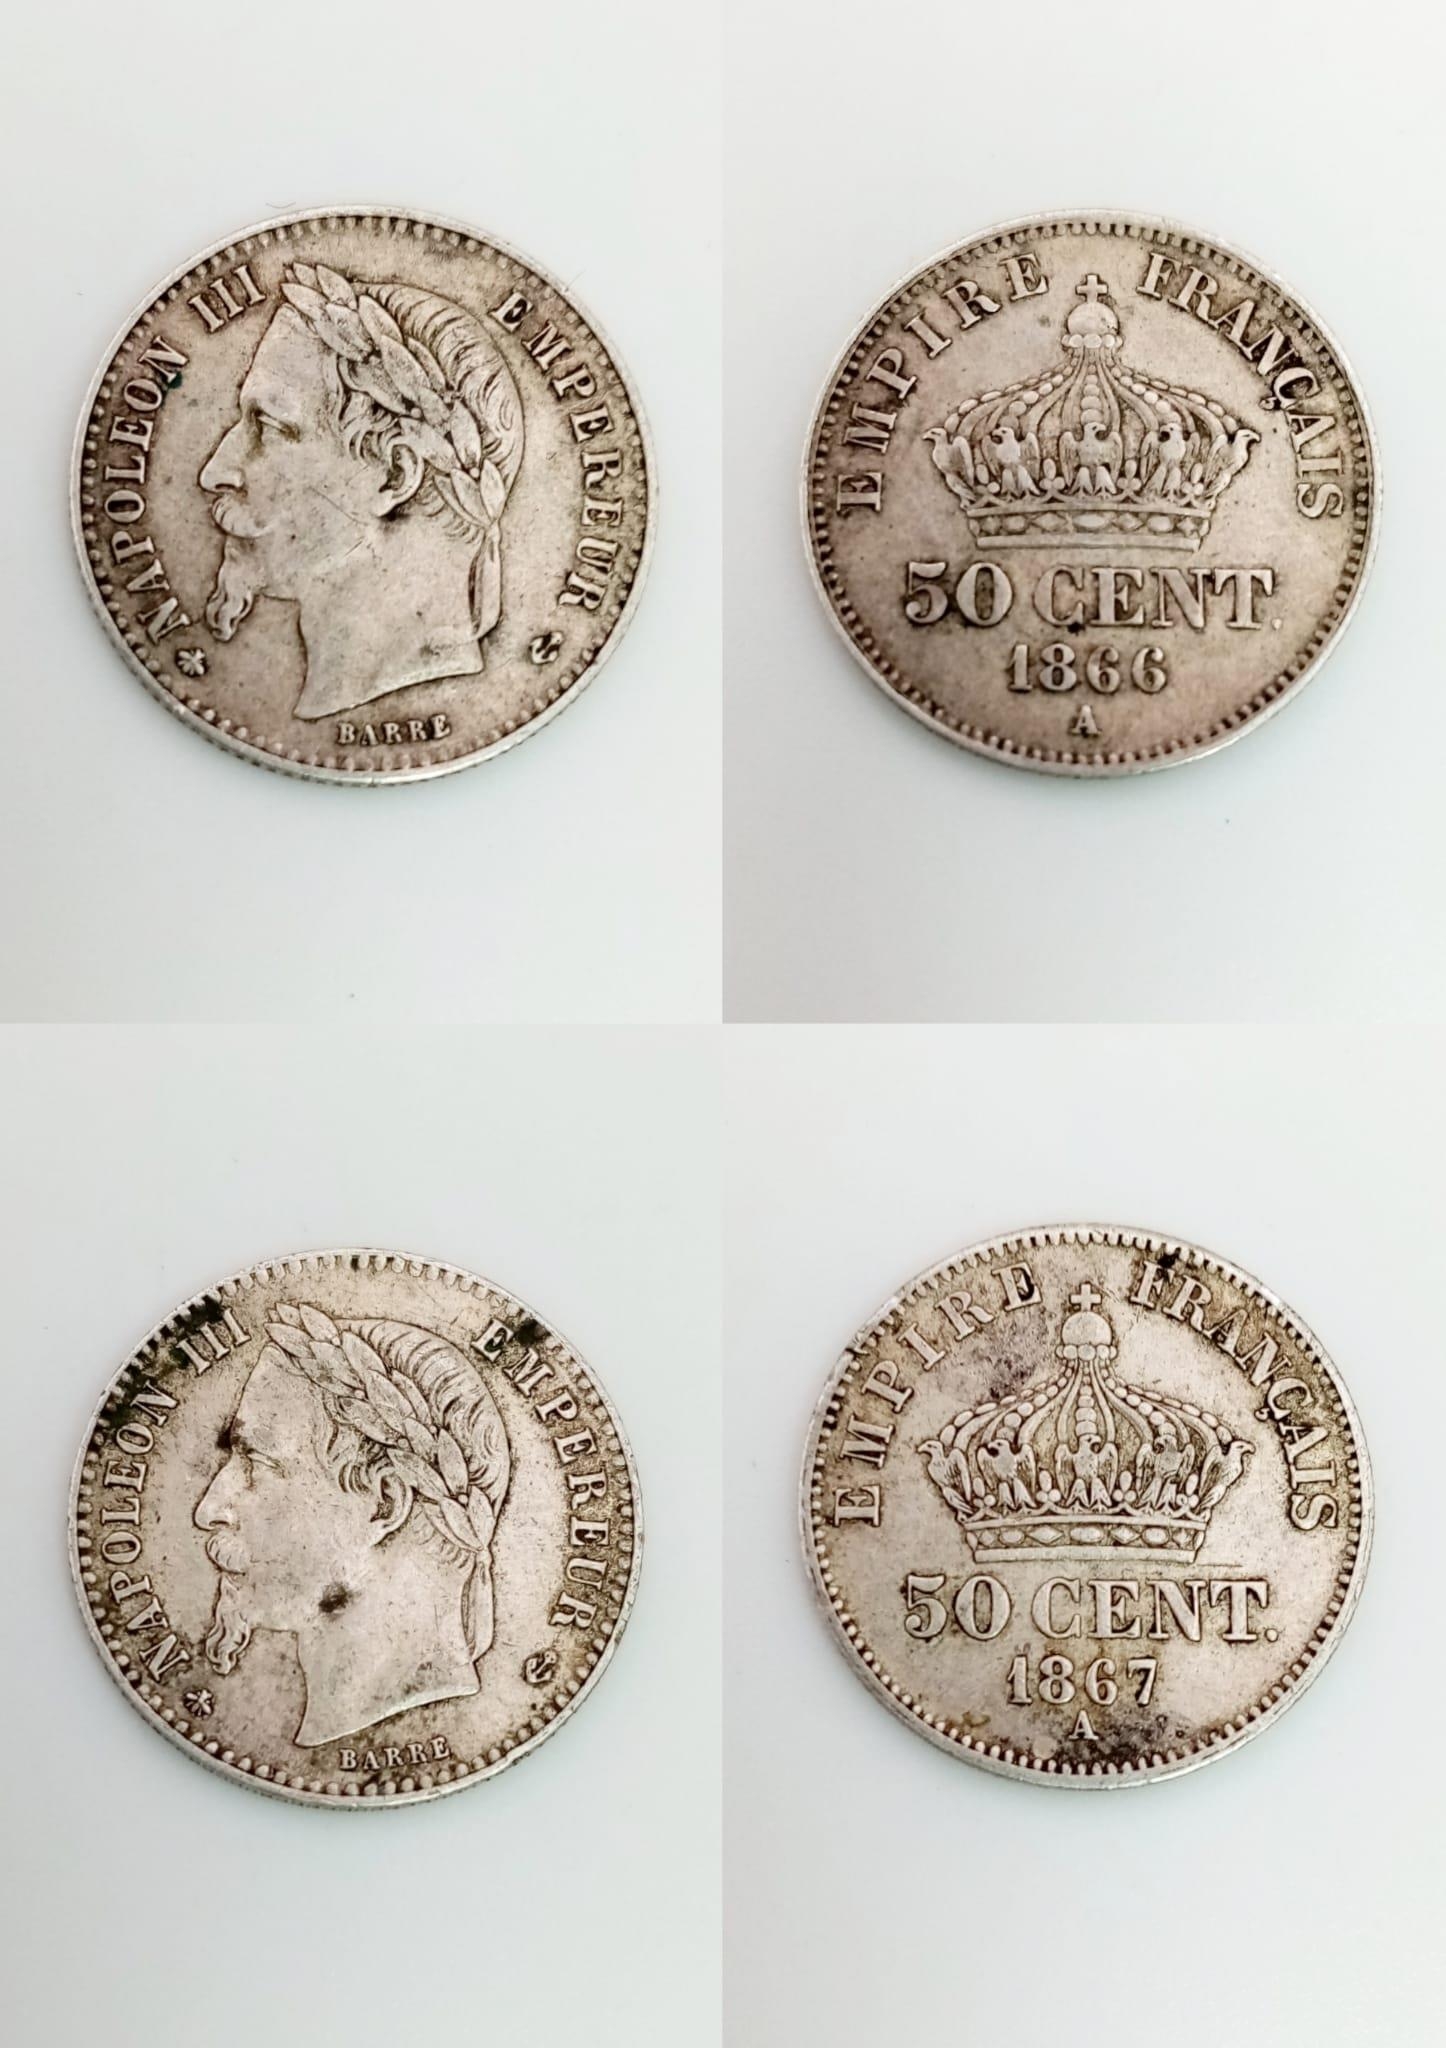 Two French 50 Centine Silver Coins - 1866A and 1867A. Please see photos for conditions. - Image 2 of 4